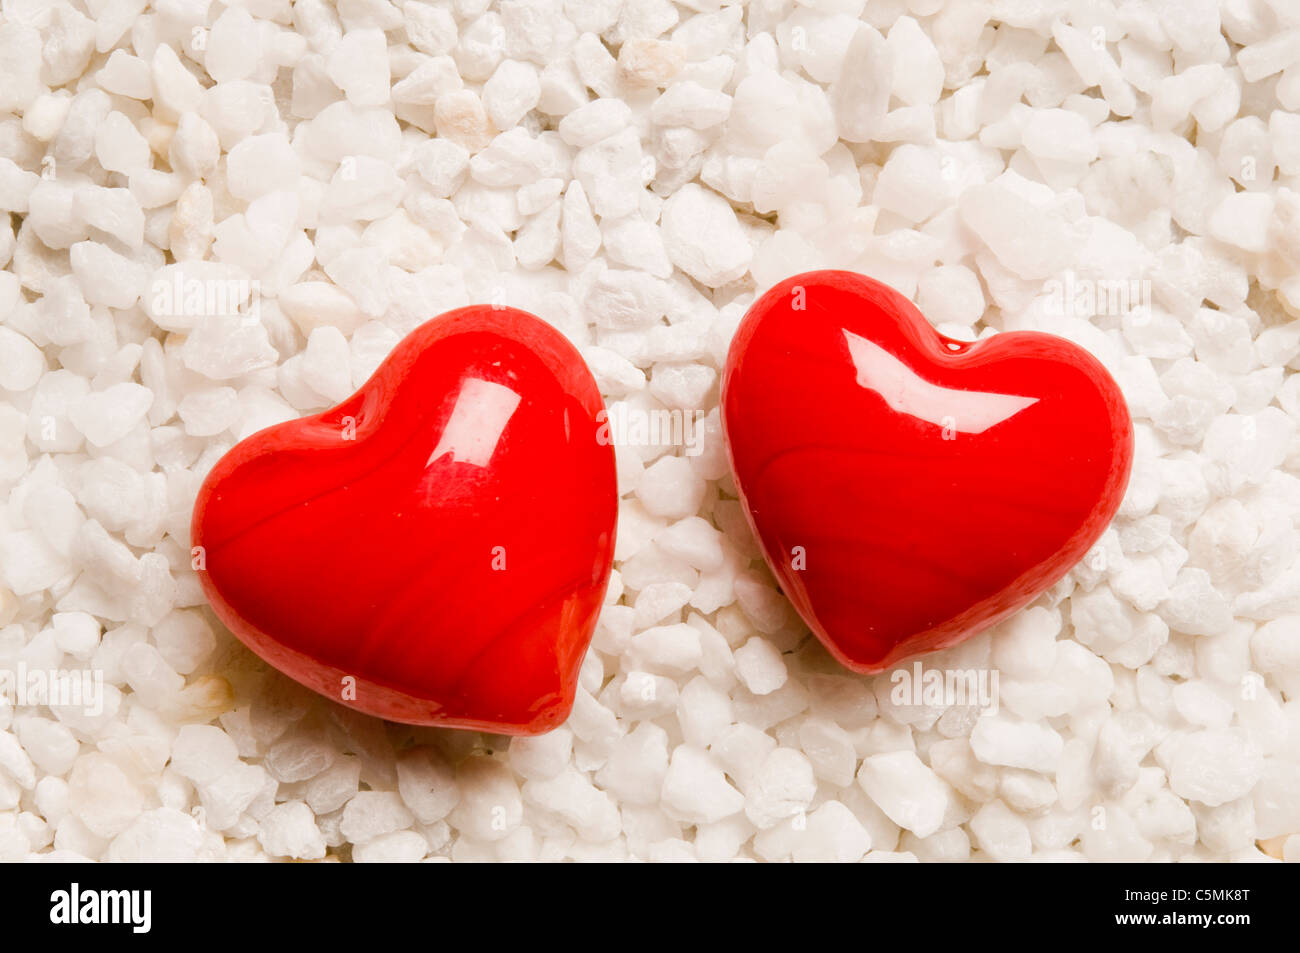 two valentine heart shaped stones, love concept Stock Photo